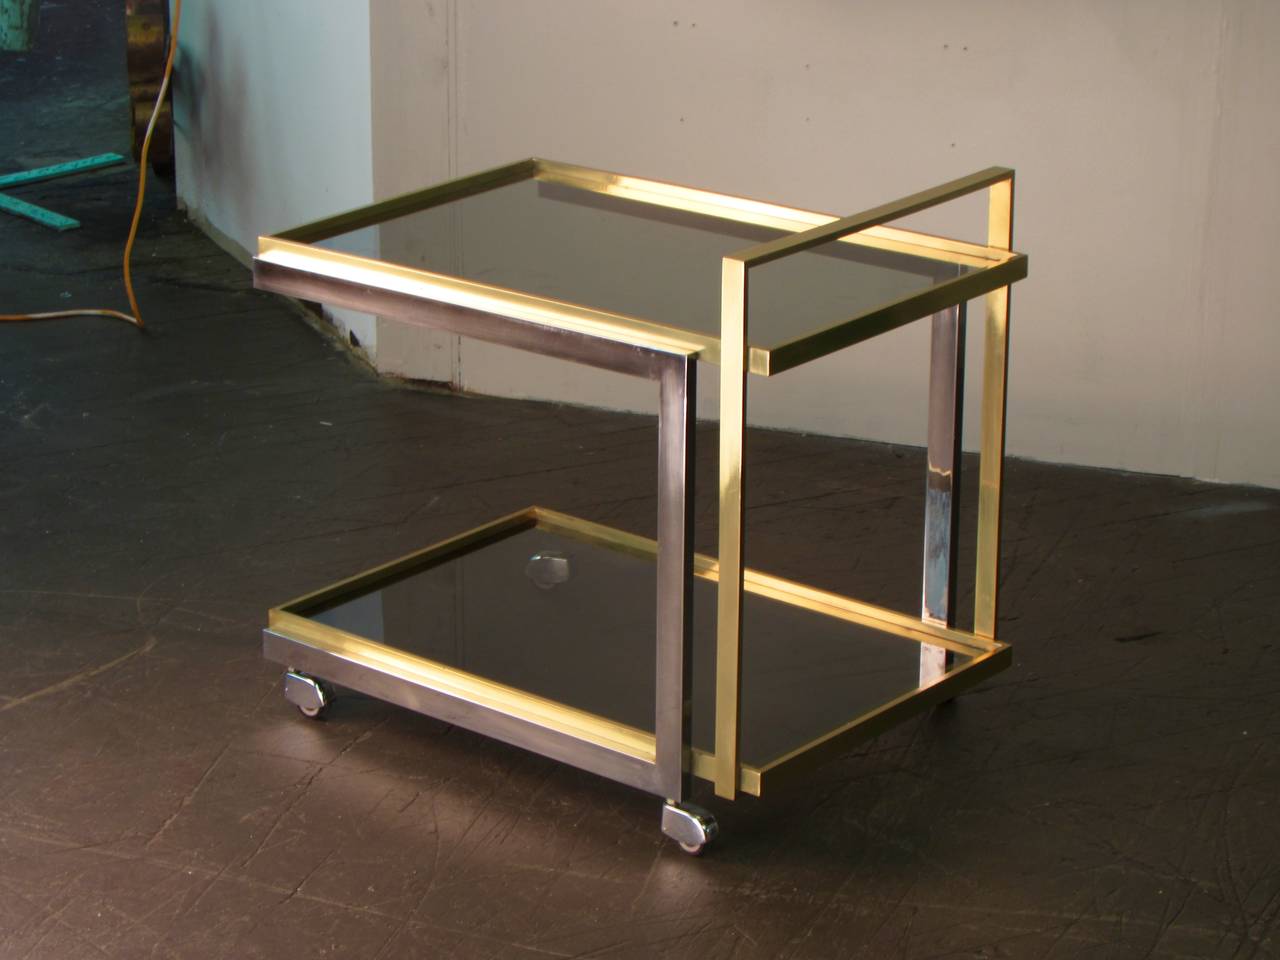 Magnificent brass and chrome cantilevered bar cart, Italy 1970s. This is one of the best bar carts we have had. Purchased and imported from Italy. The piece is very heavy and of the highest quality. The condition is normal for age and use. Chrome